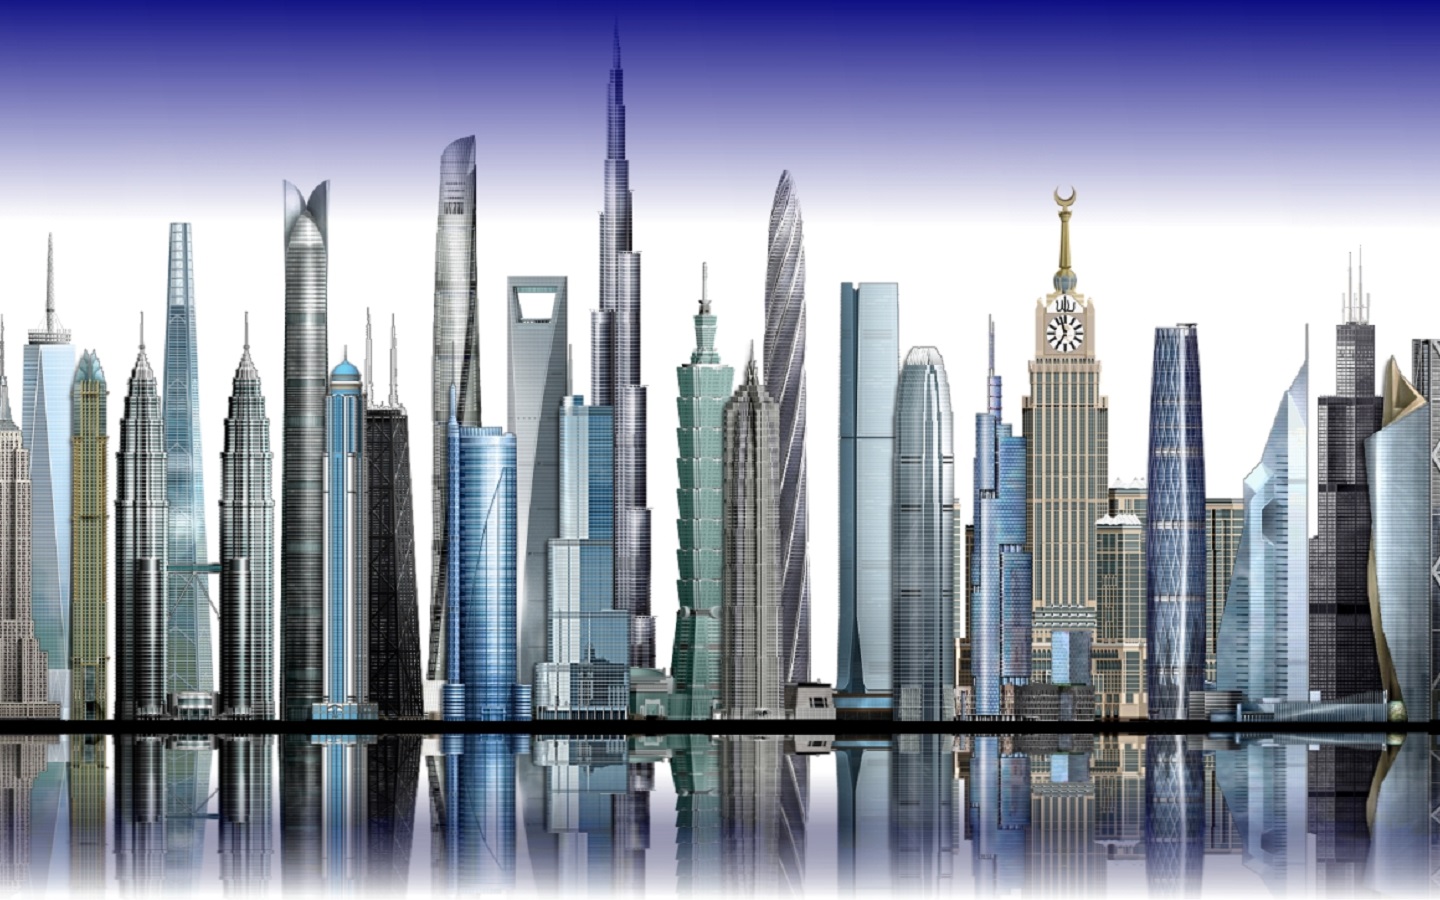 15 Tallest Buildings in the World